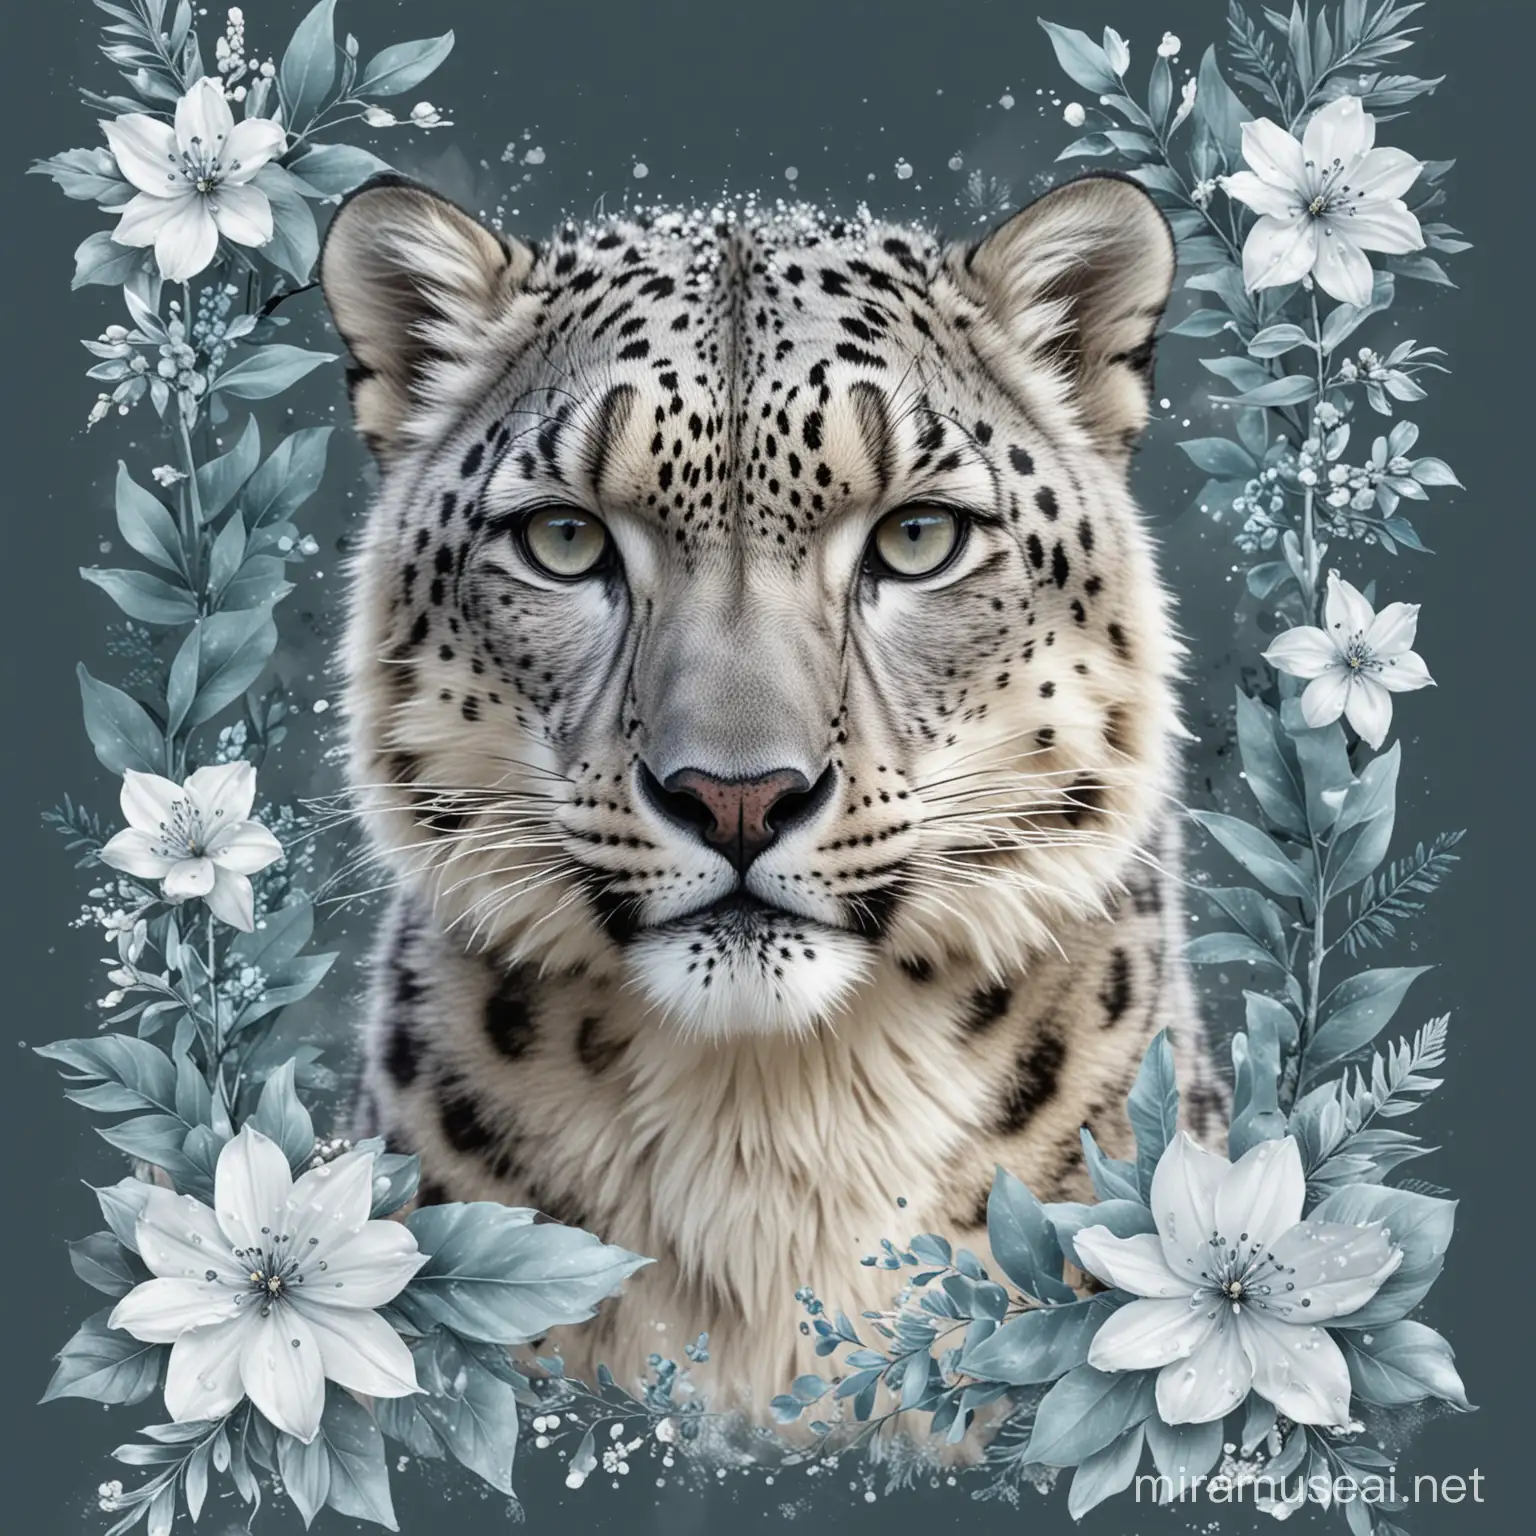 please give me a design for a t-shirt with snow leopard full body and with icy theme with frosted leaves and flowers, with aesthetic and beautiful, sophisticated design d